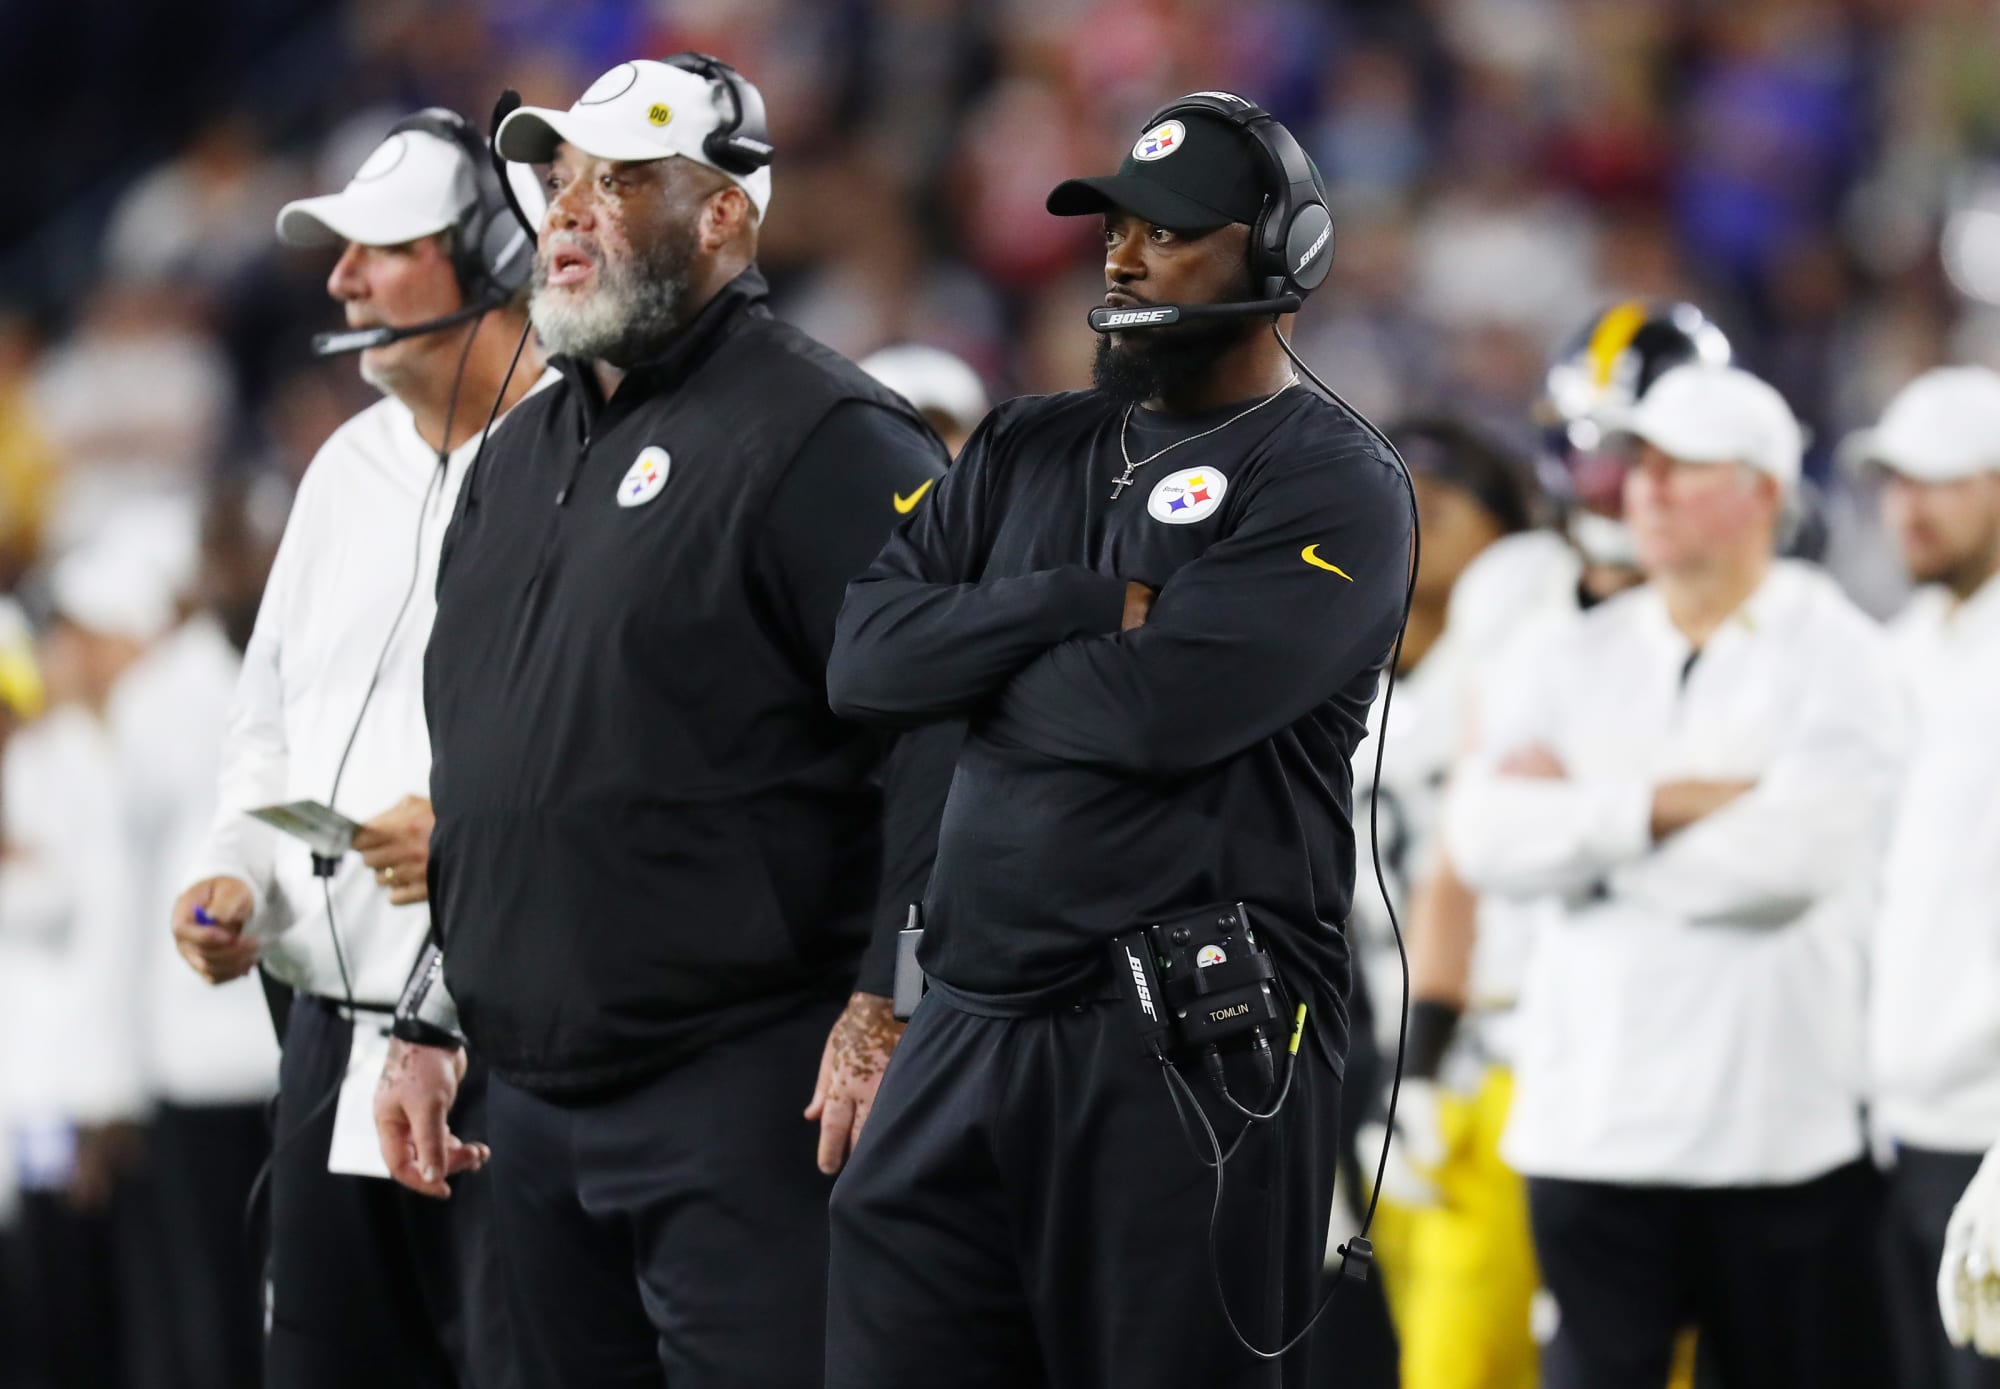 Is it time for Steelers to 'clean house' with their coaching staff?